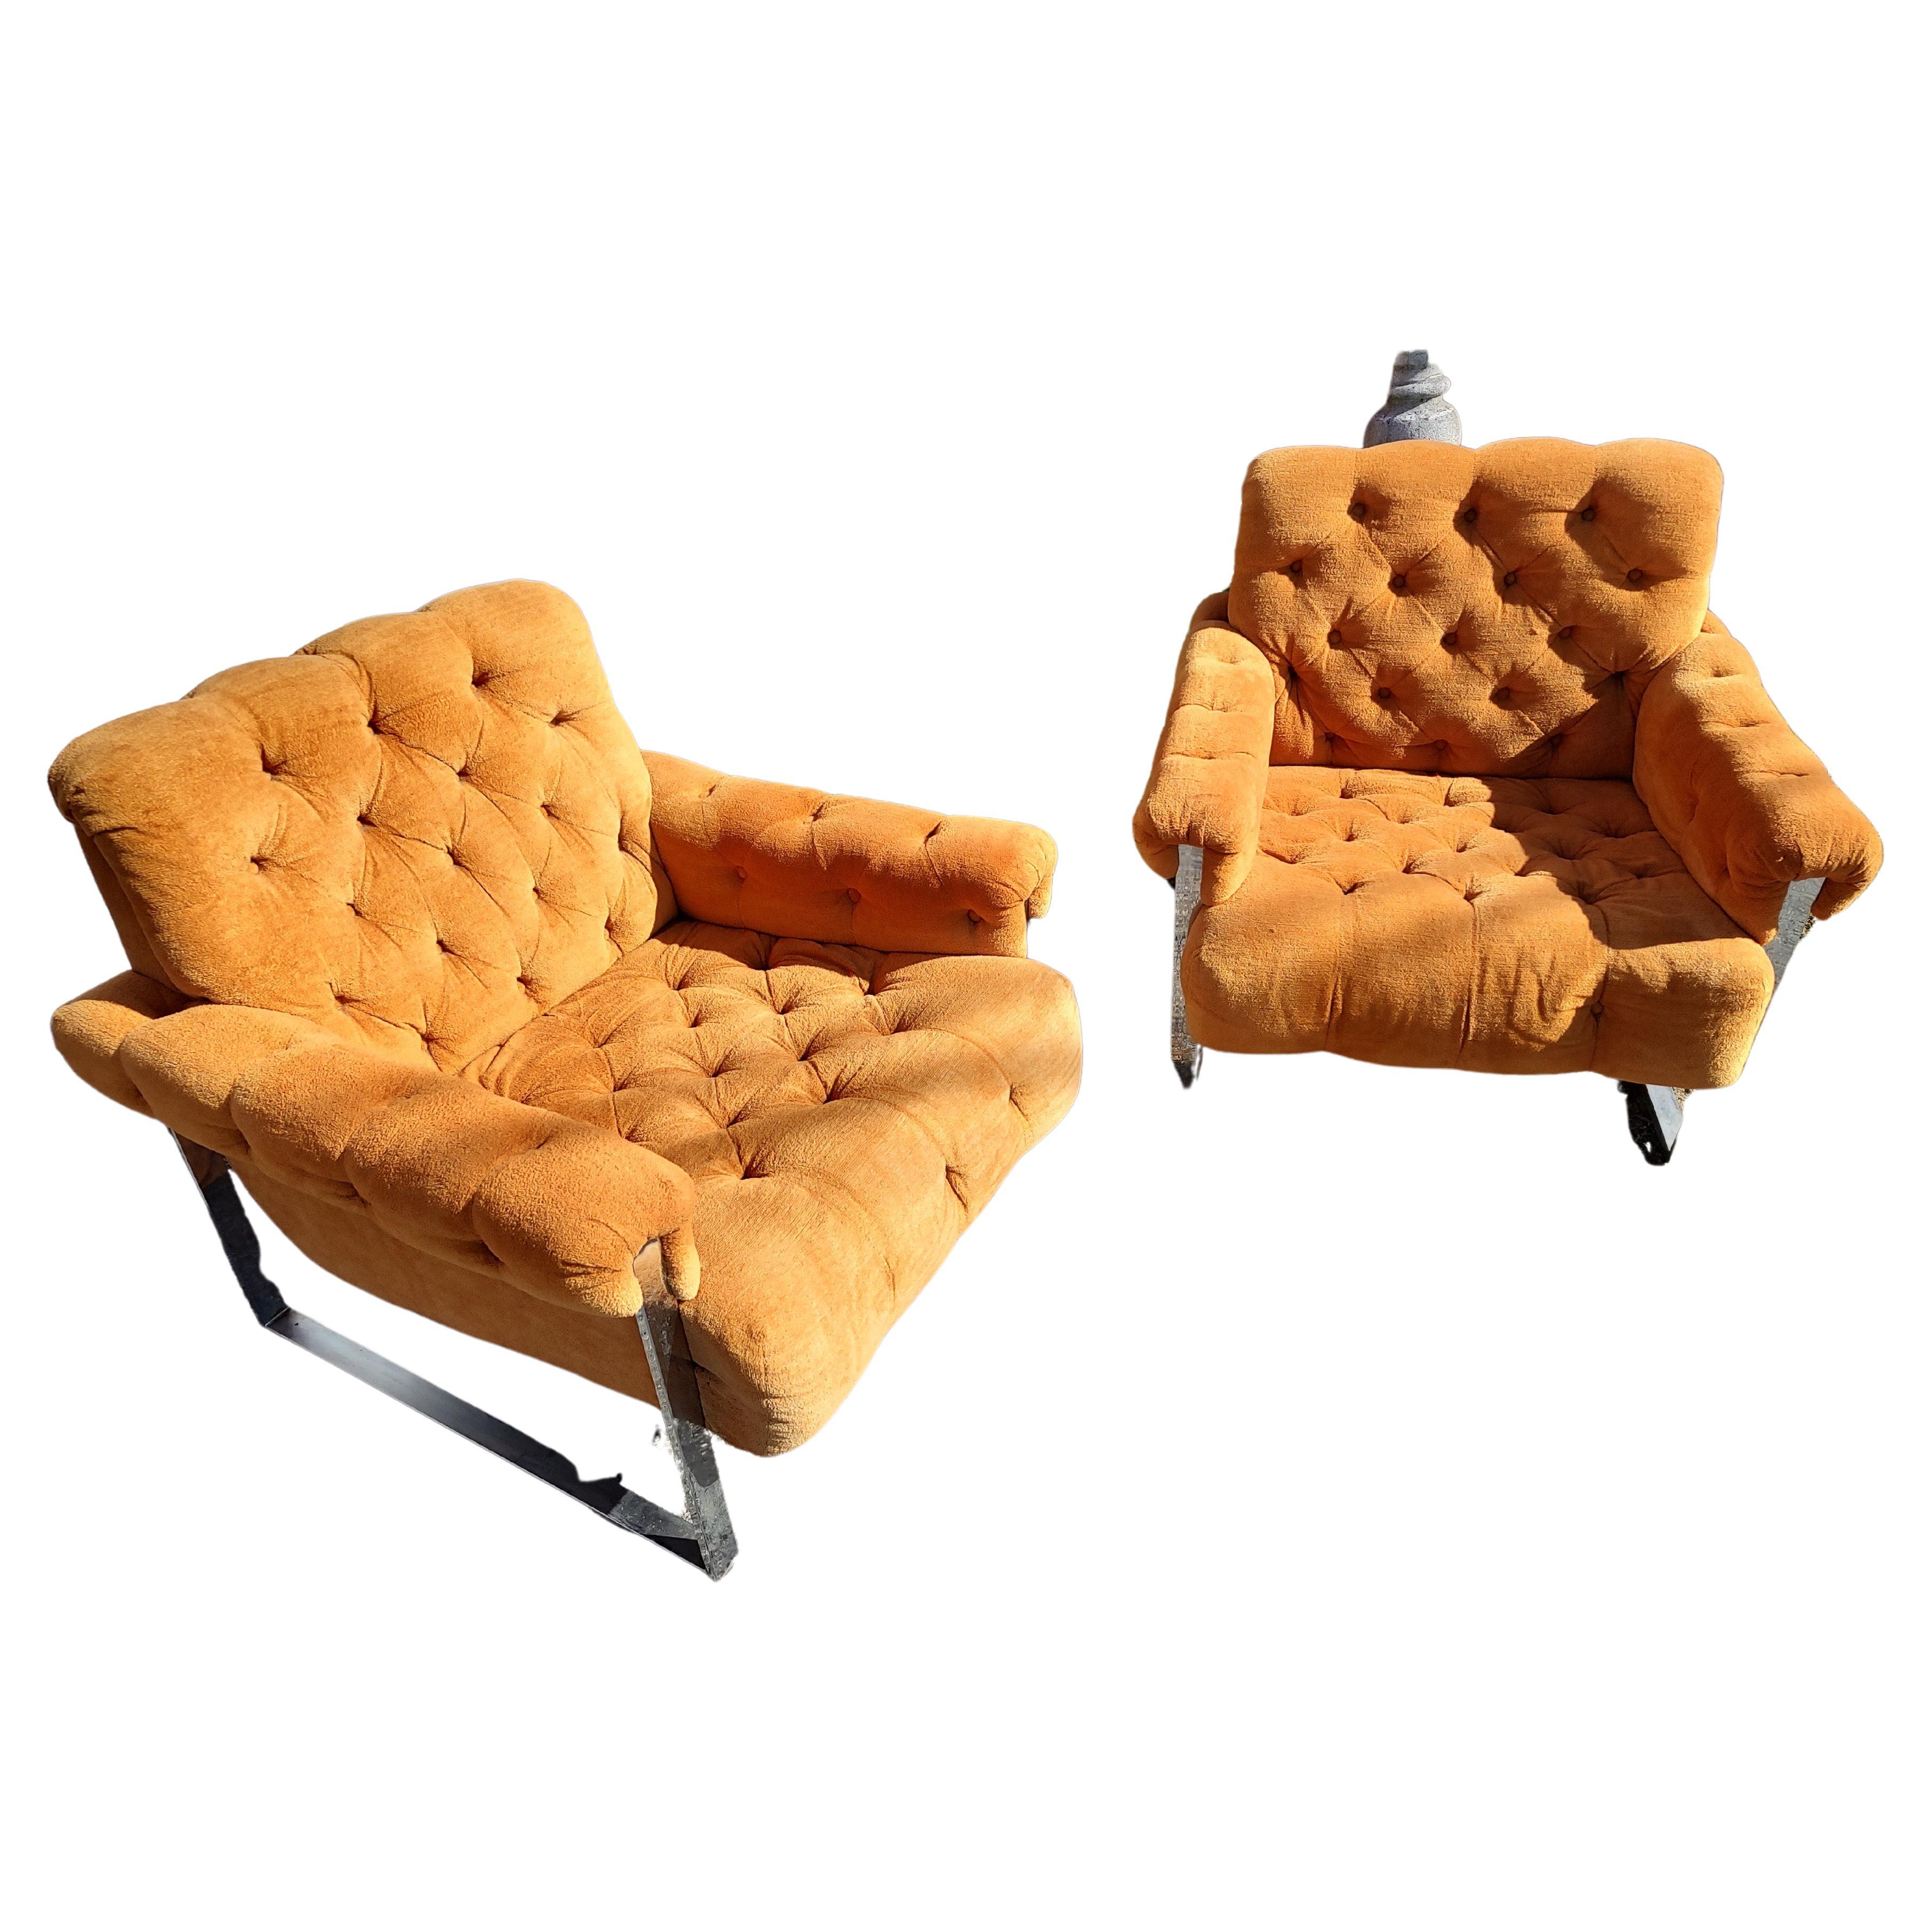 Pair of Button Tufted Lounge Chairs in Orange with Chrome Sled Bases